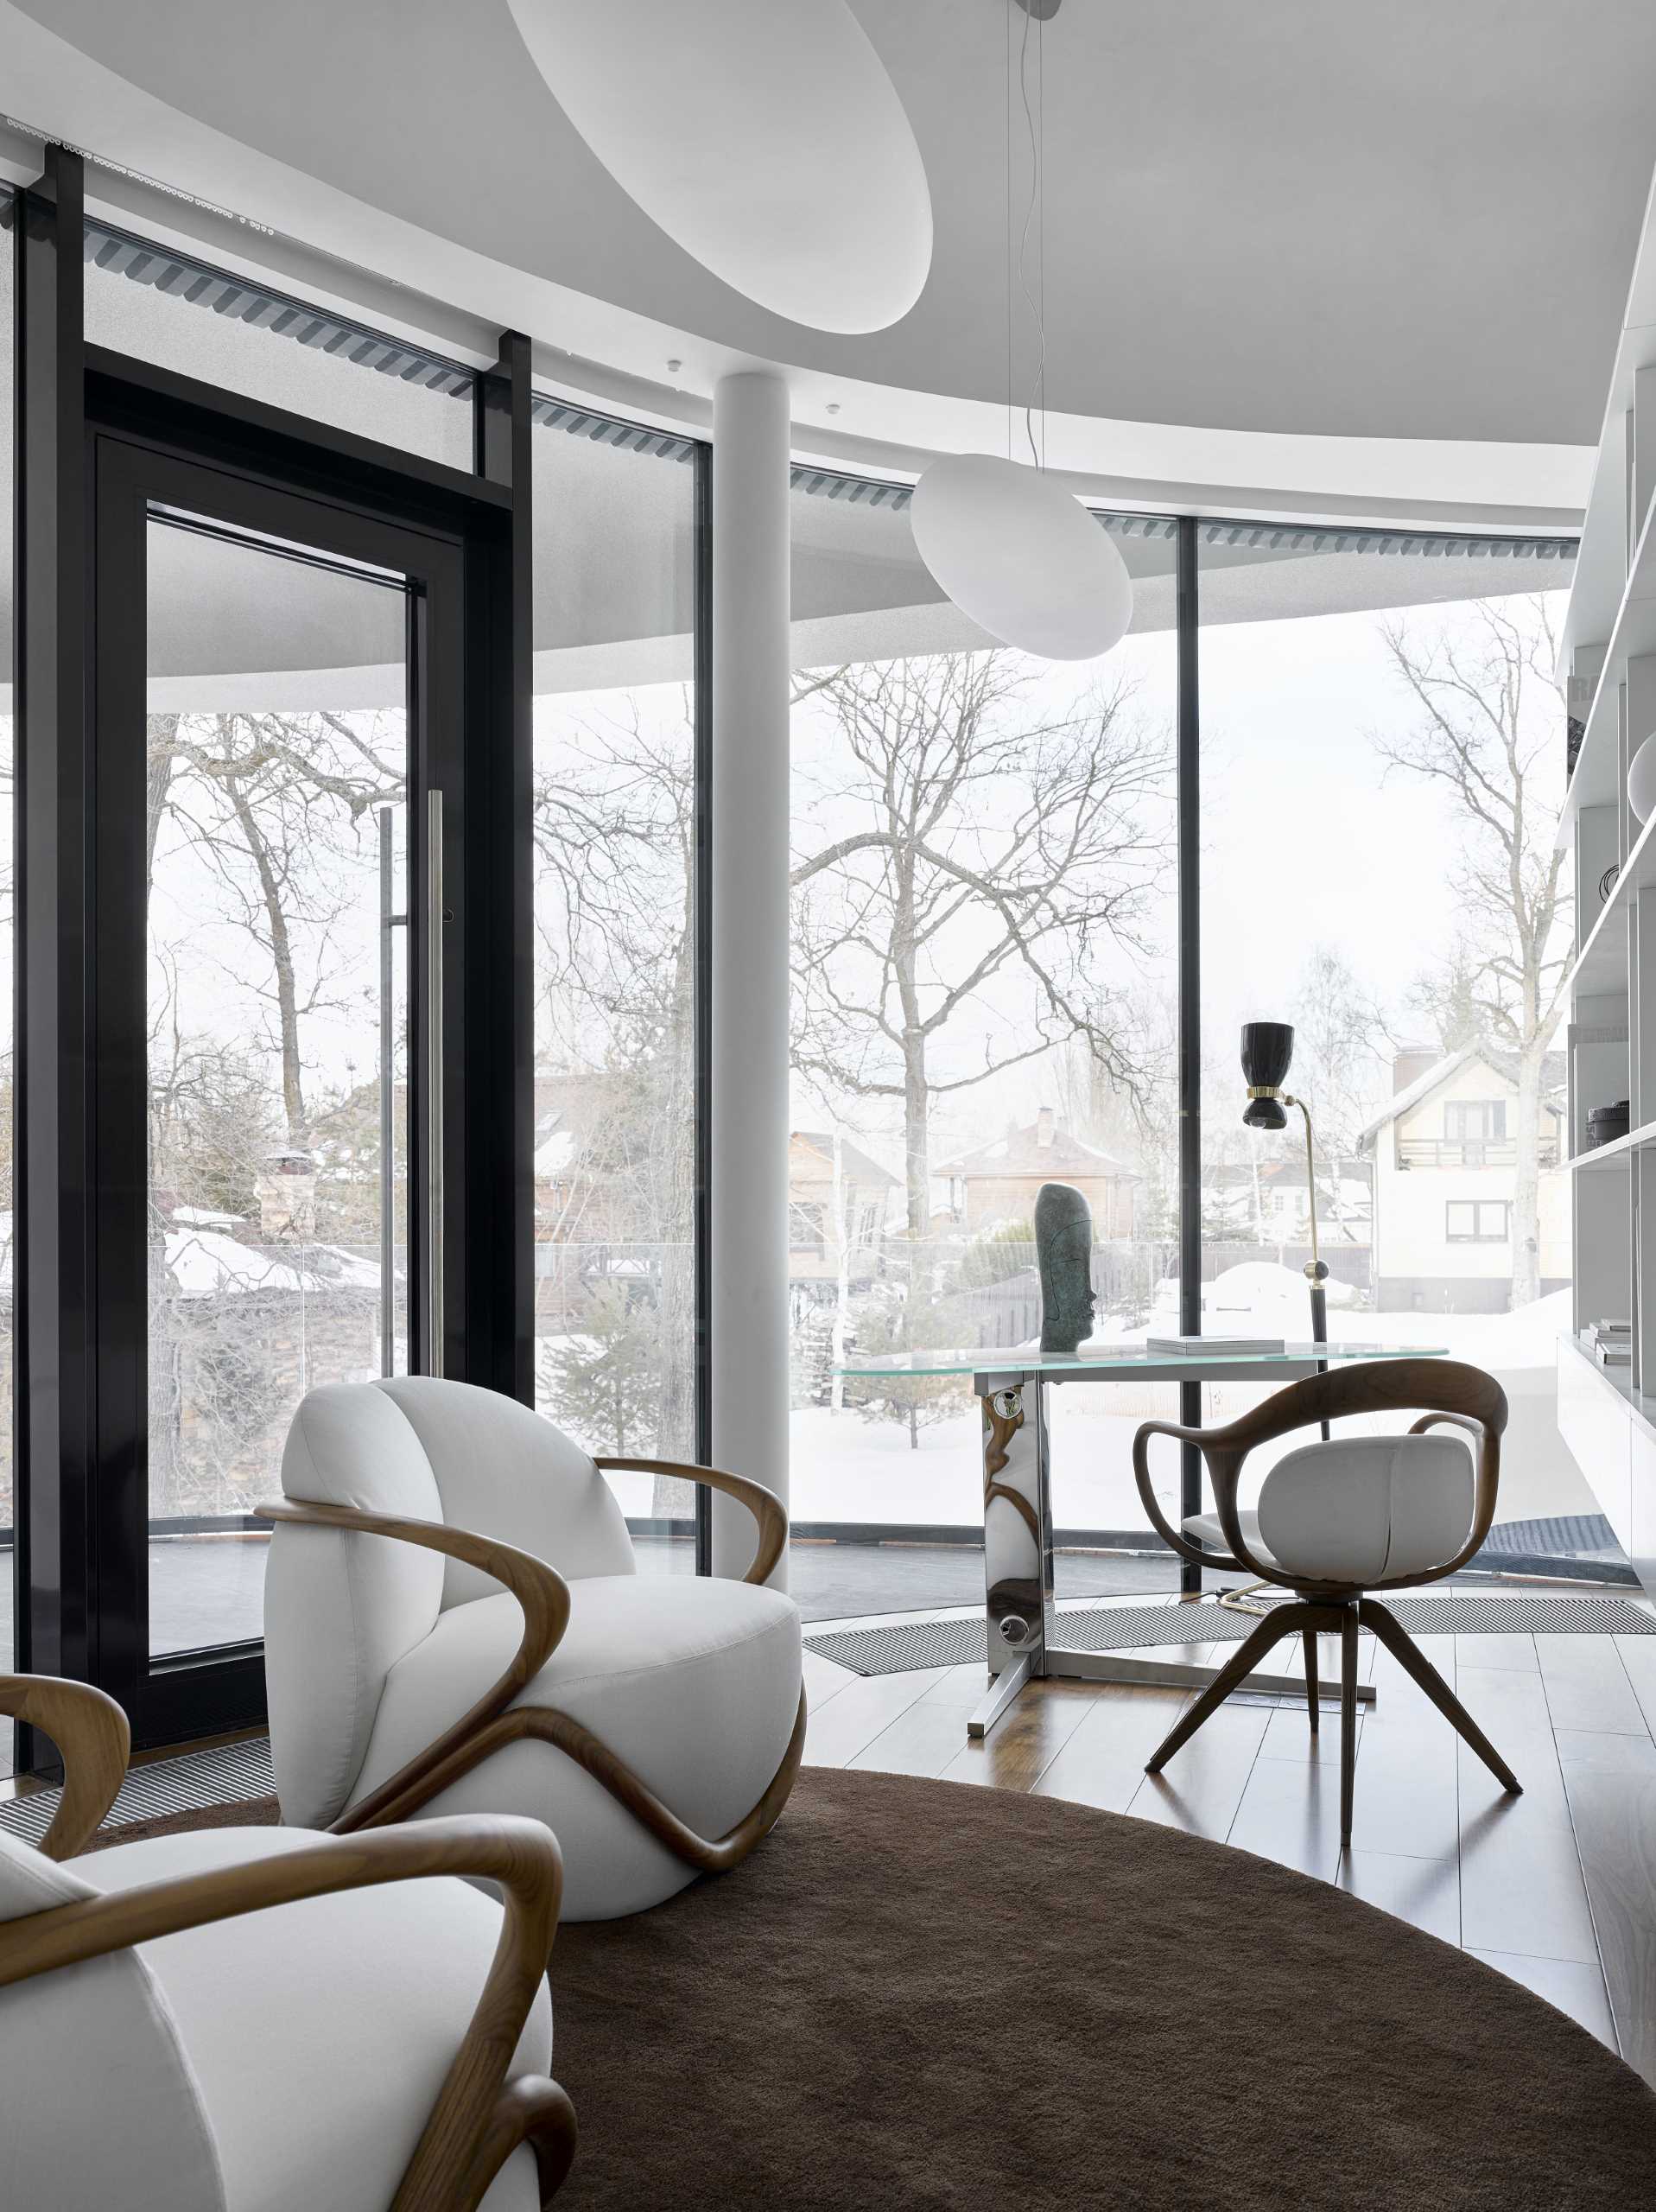 In a home office, a door in the curved glass wall opens to a balcony.